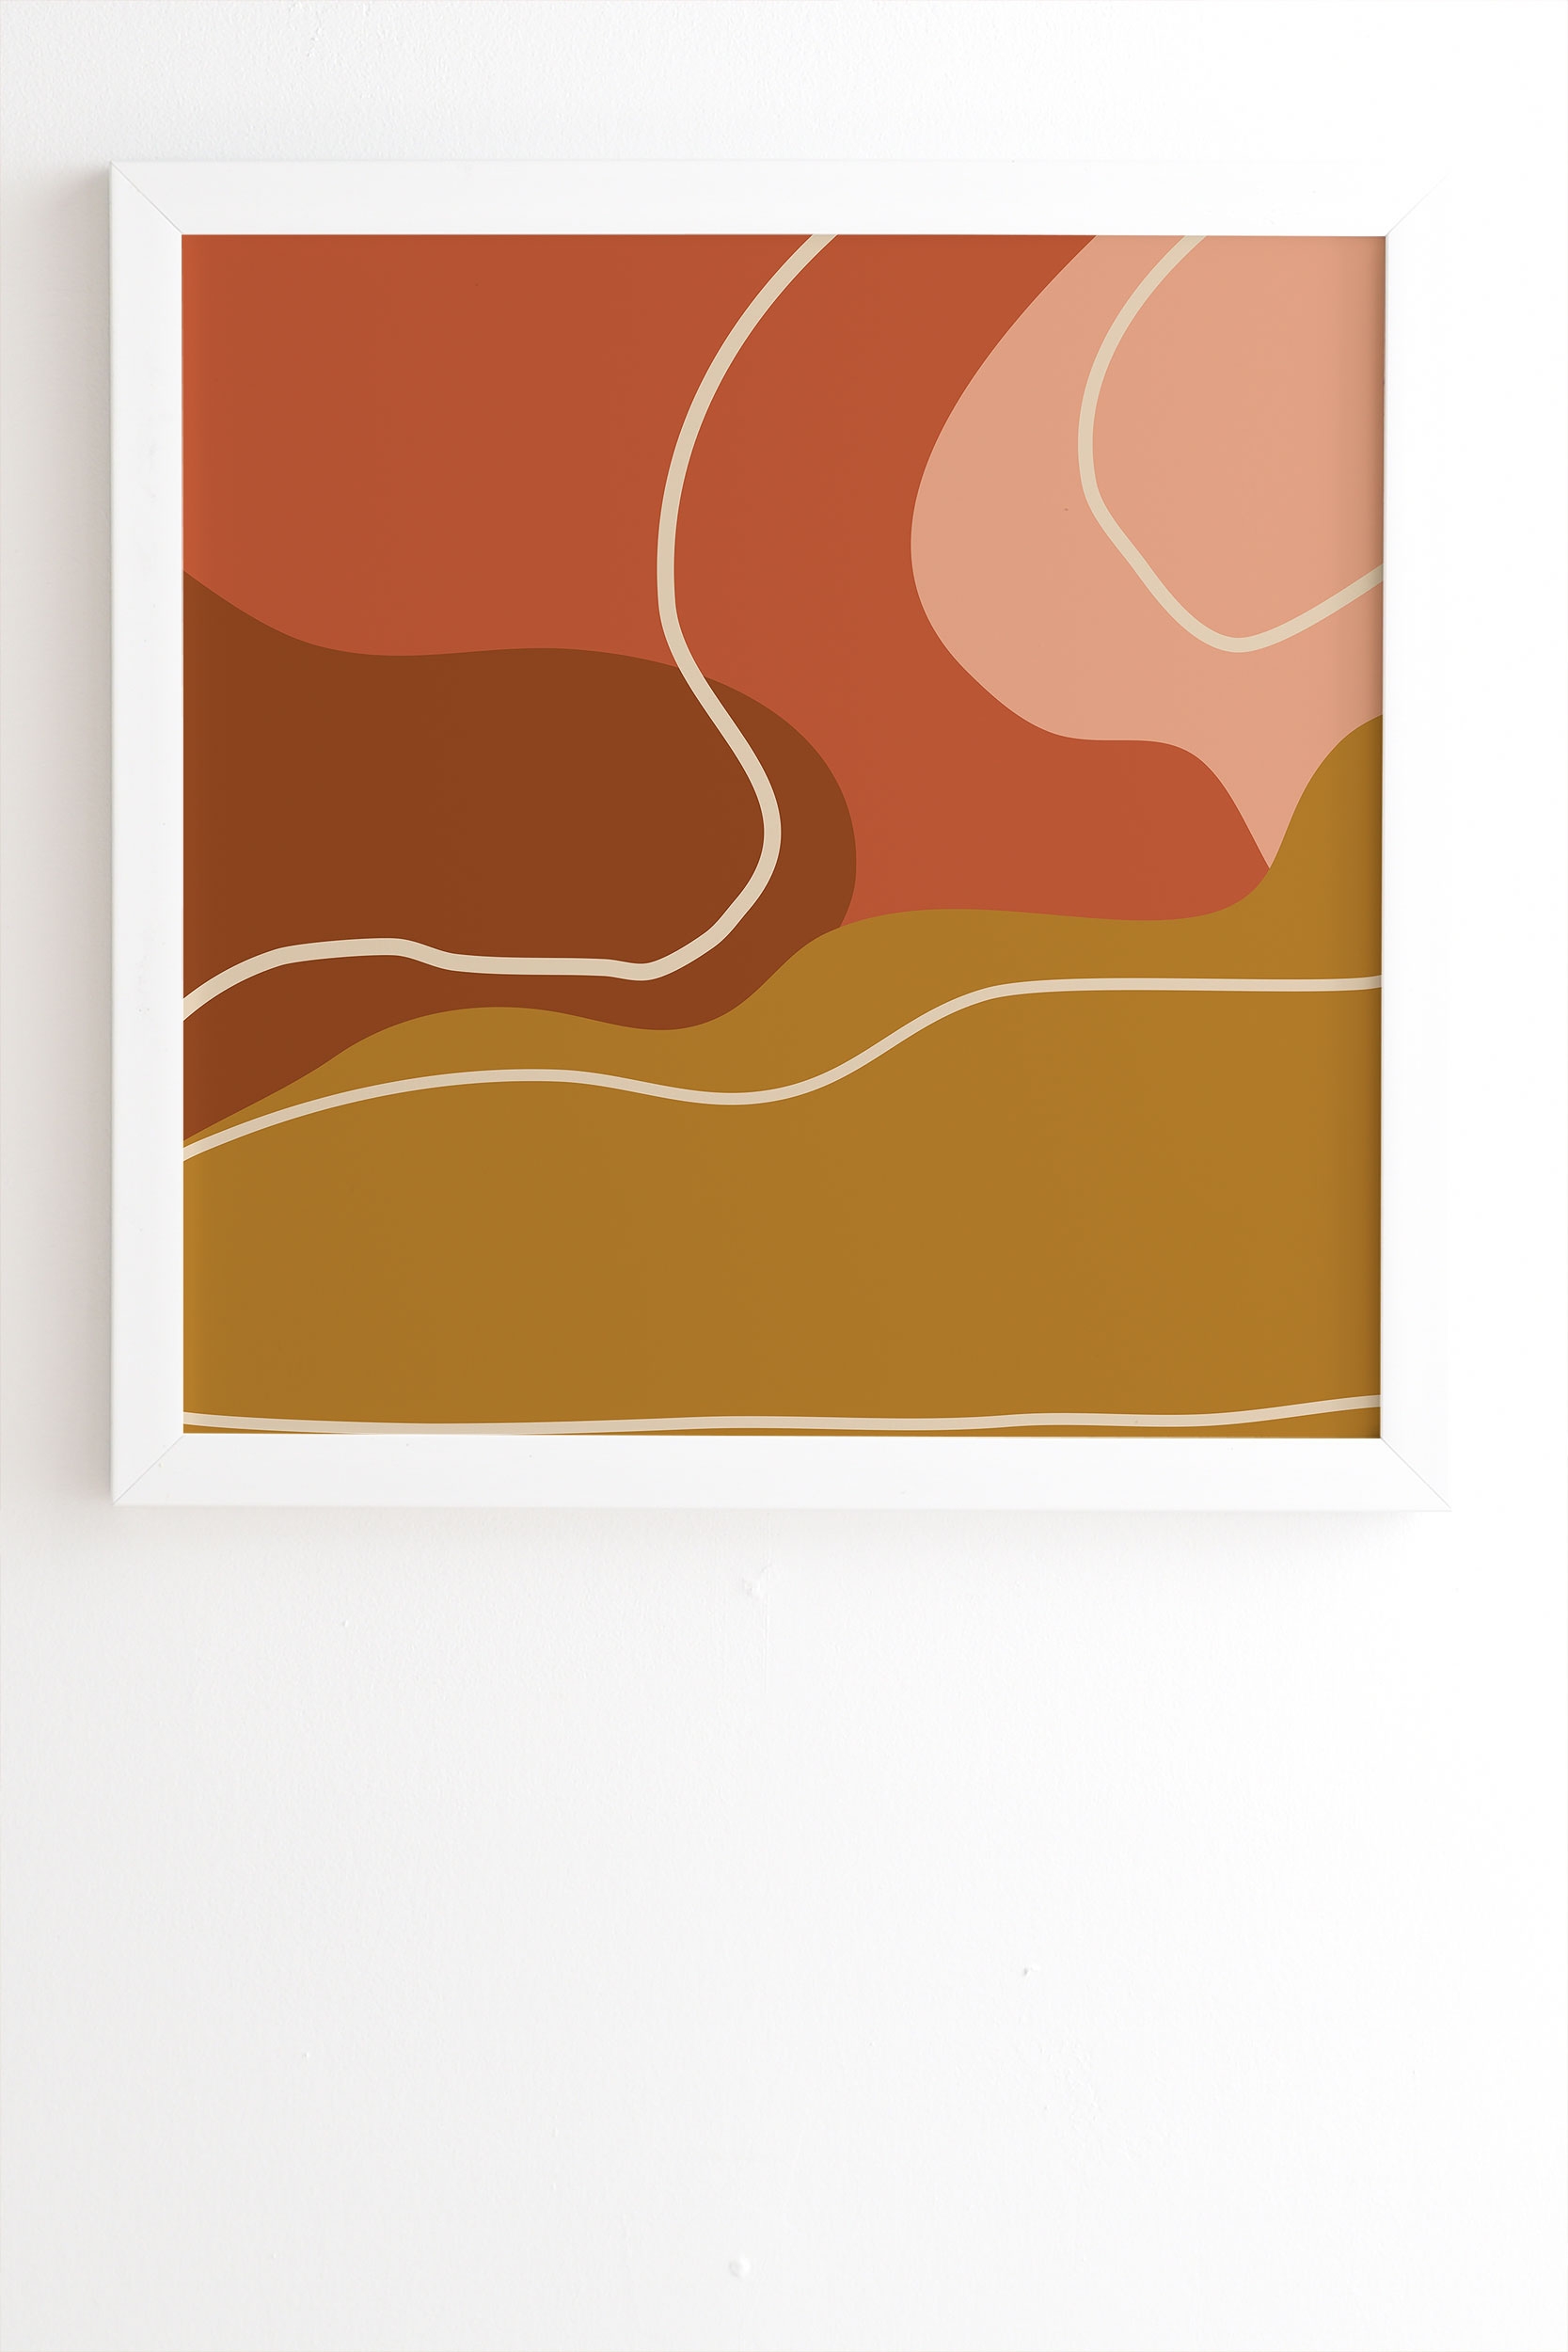 Abstract Organic Shapes In Zen by June Journal - Framed Wall Art Basic White 11" x 13" - Image 1